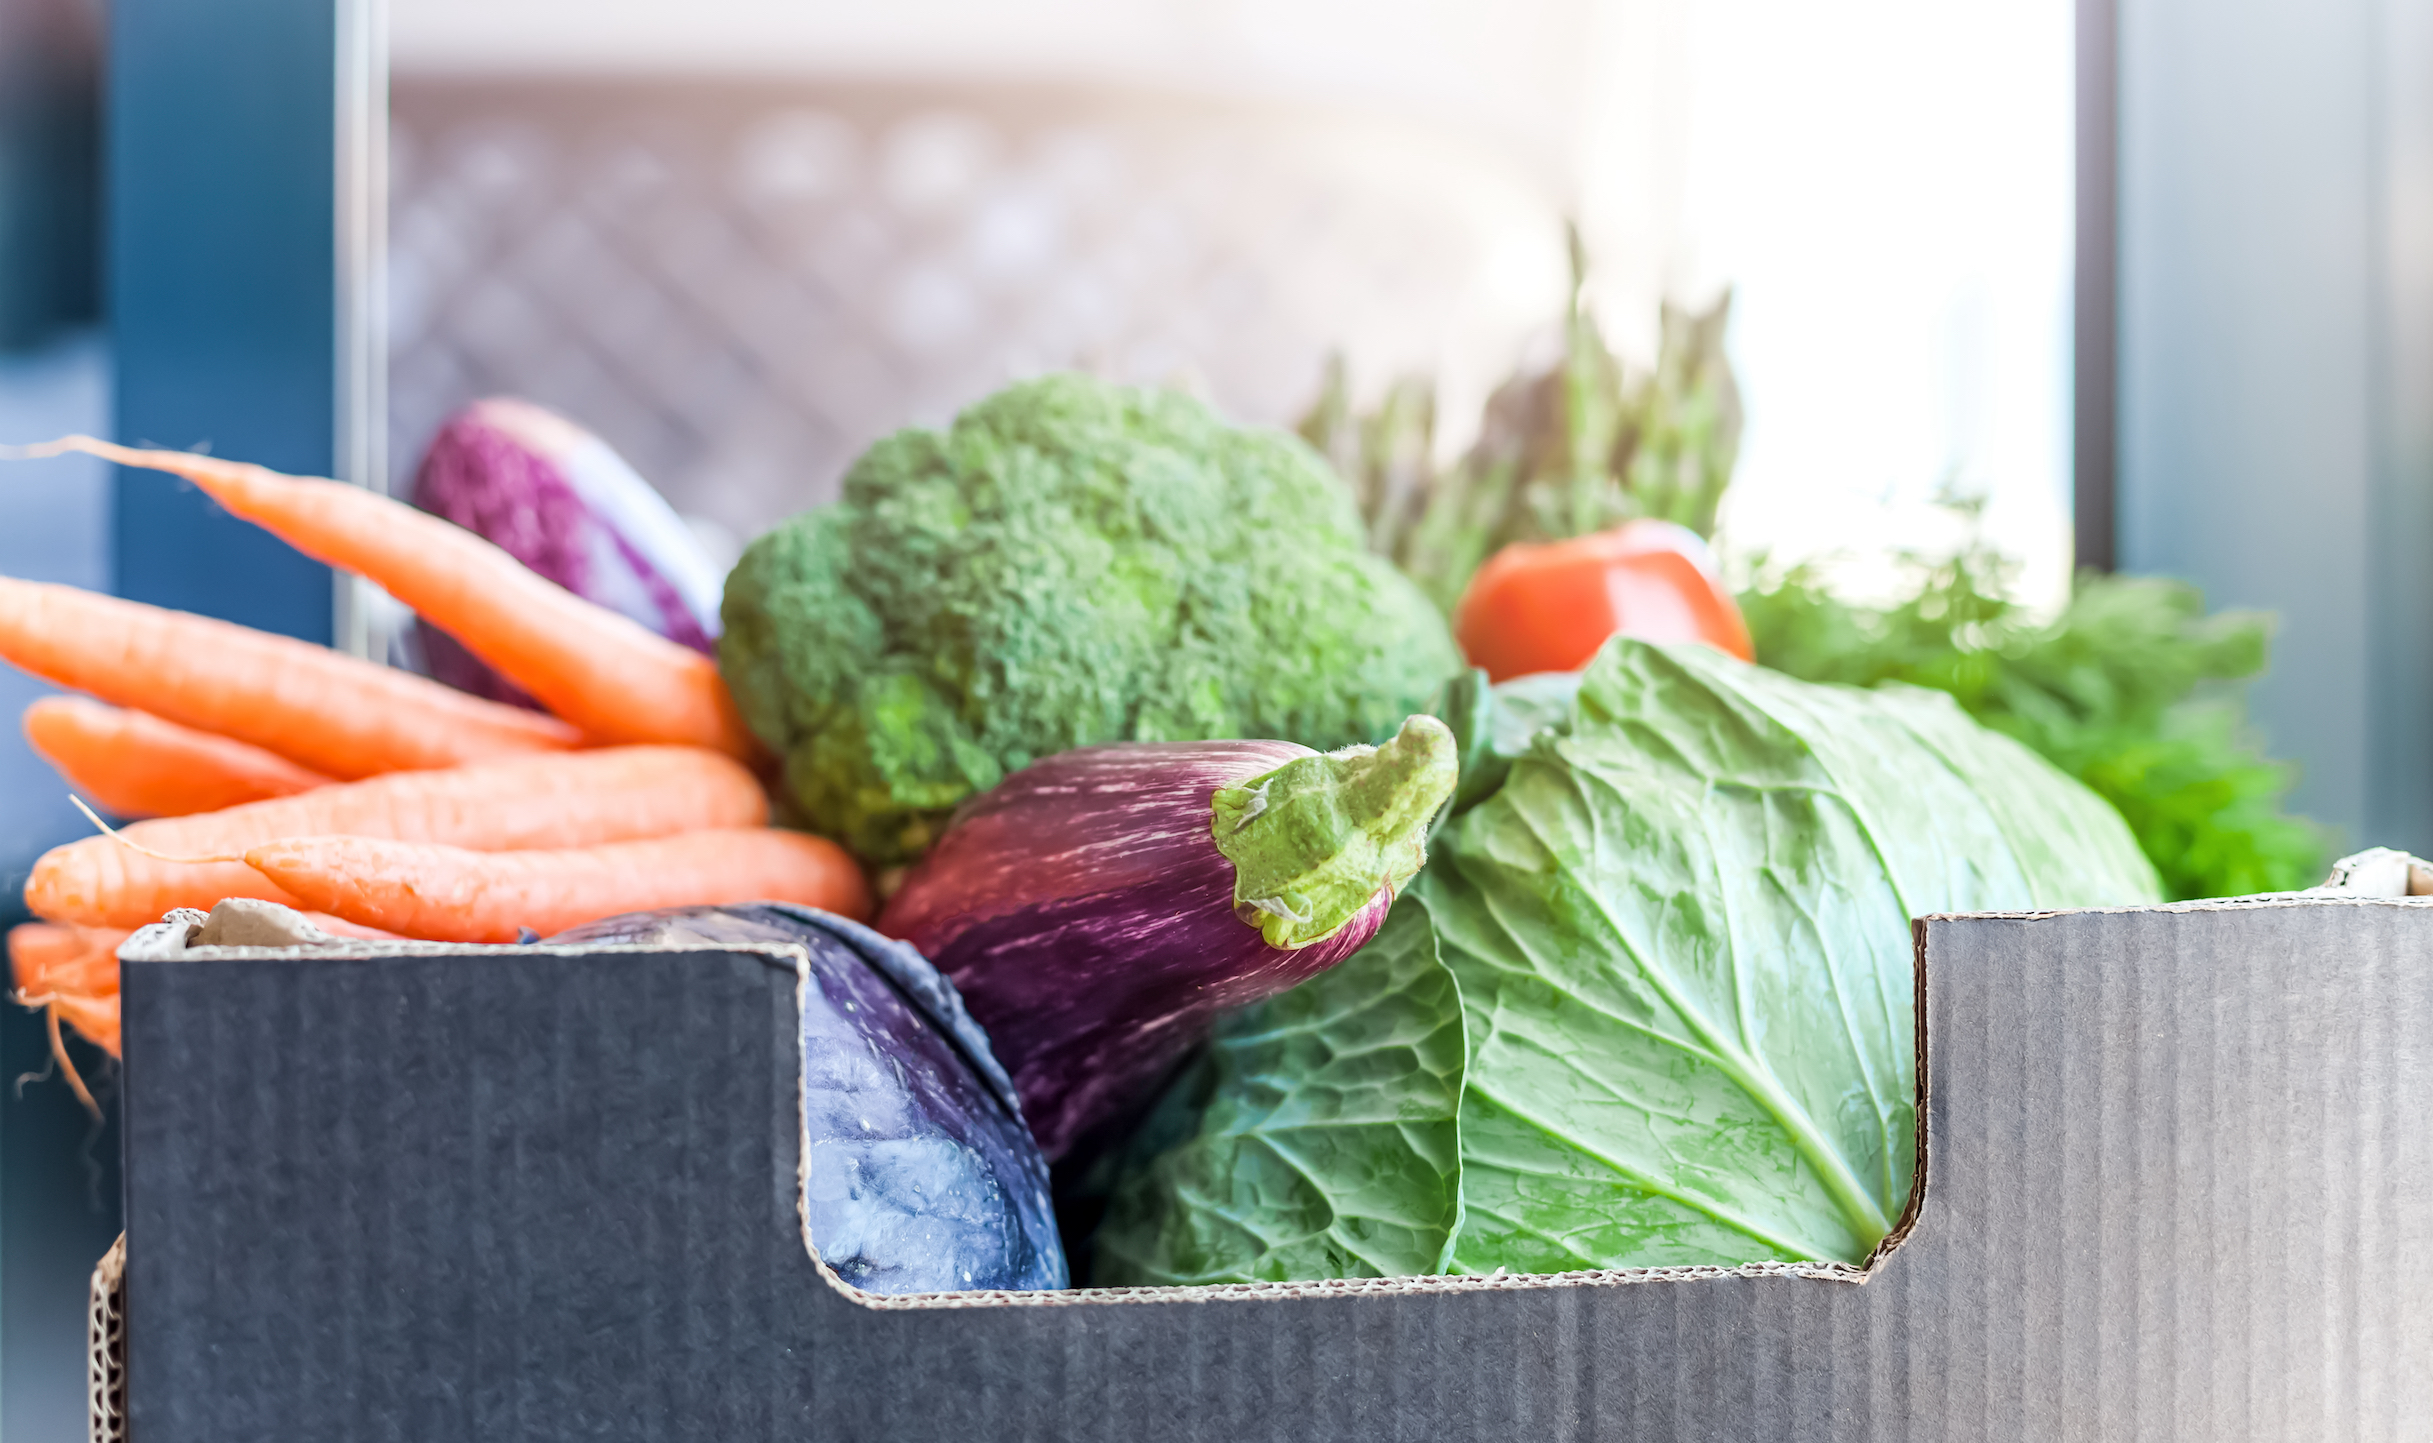 How to tell if a CSA is right for you